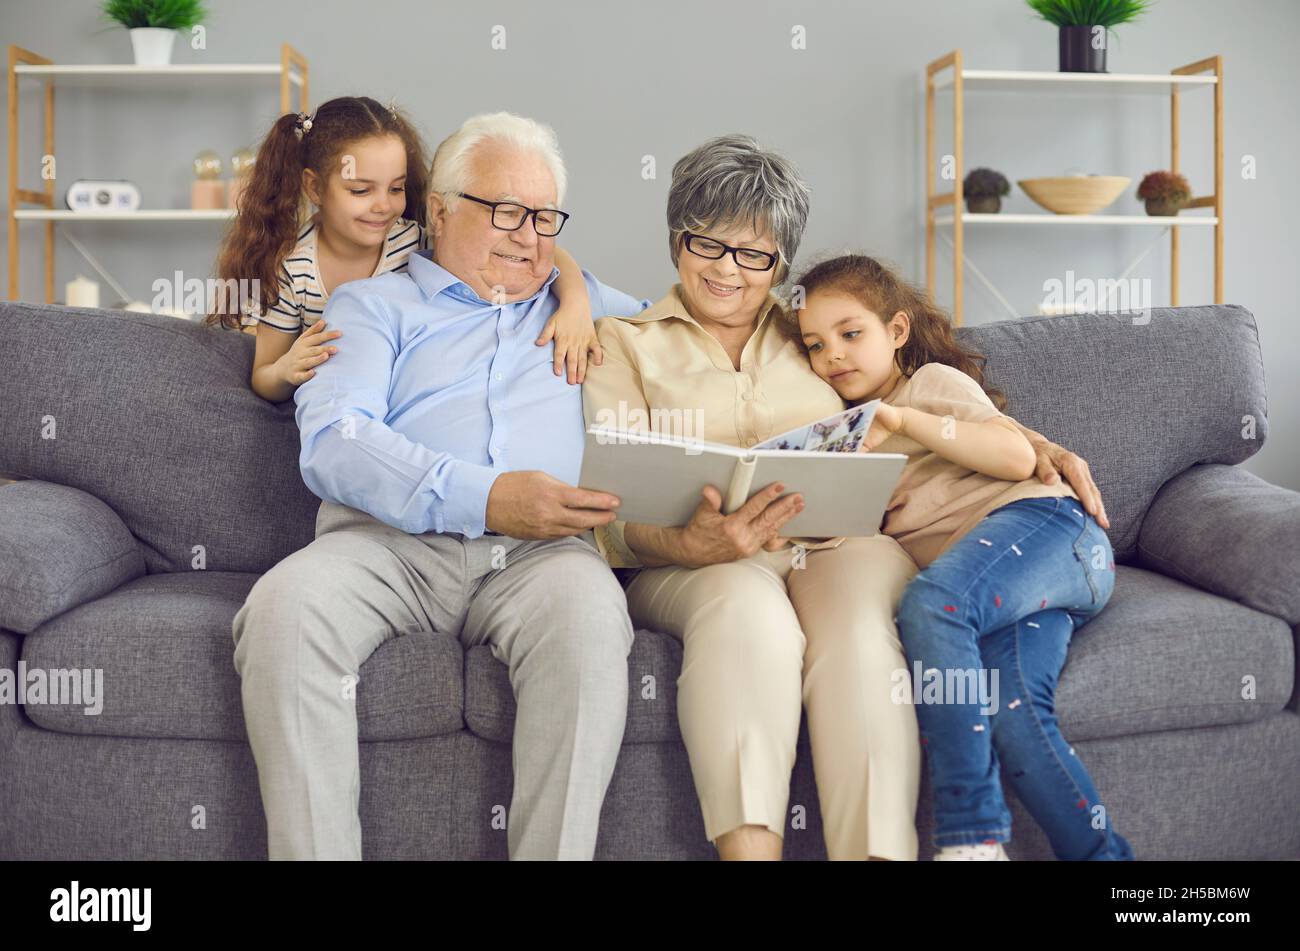 Happy grandparents and their two granddaughters look at a photo book with a family photo together. Stock Photo